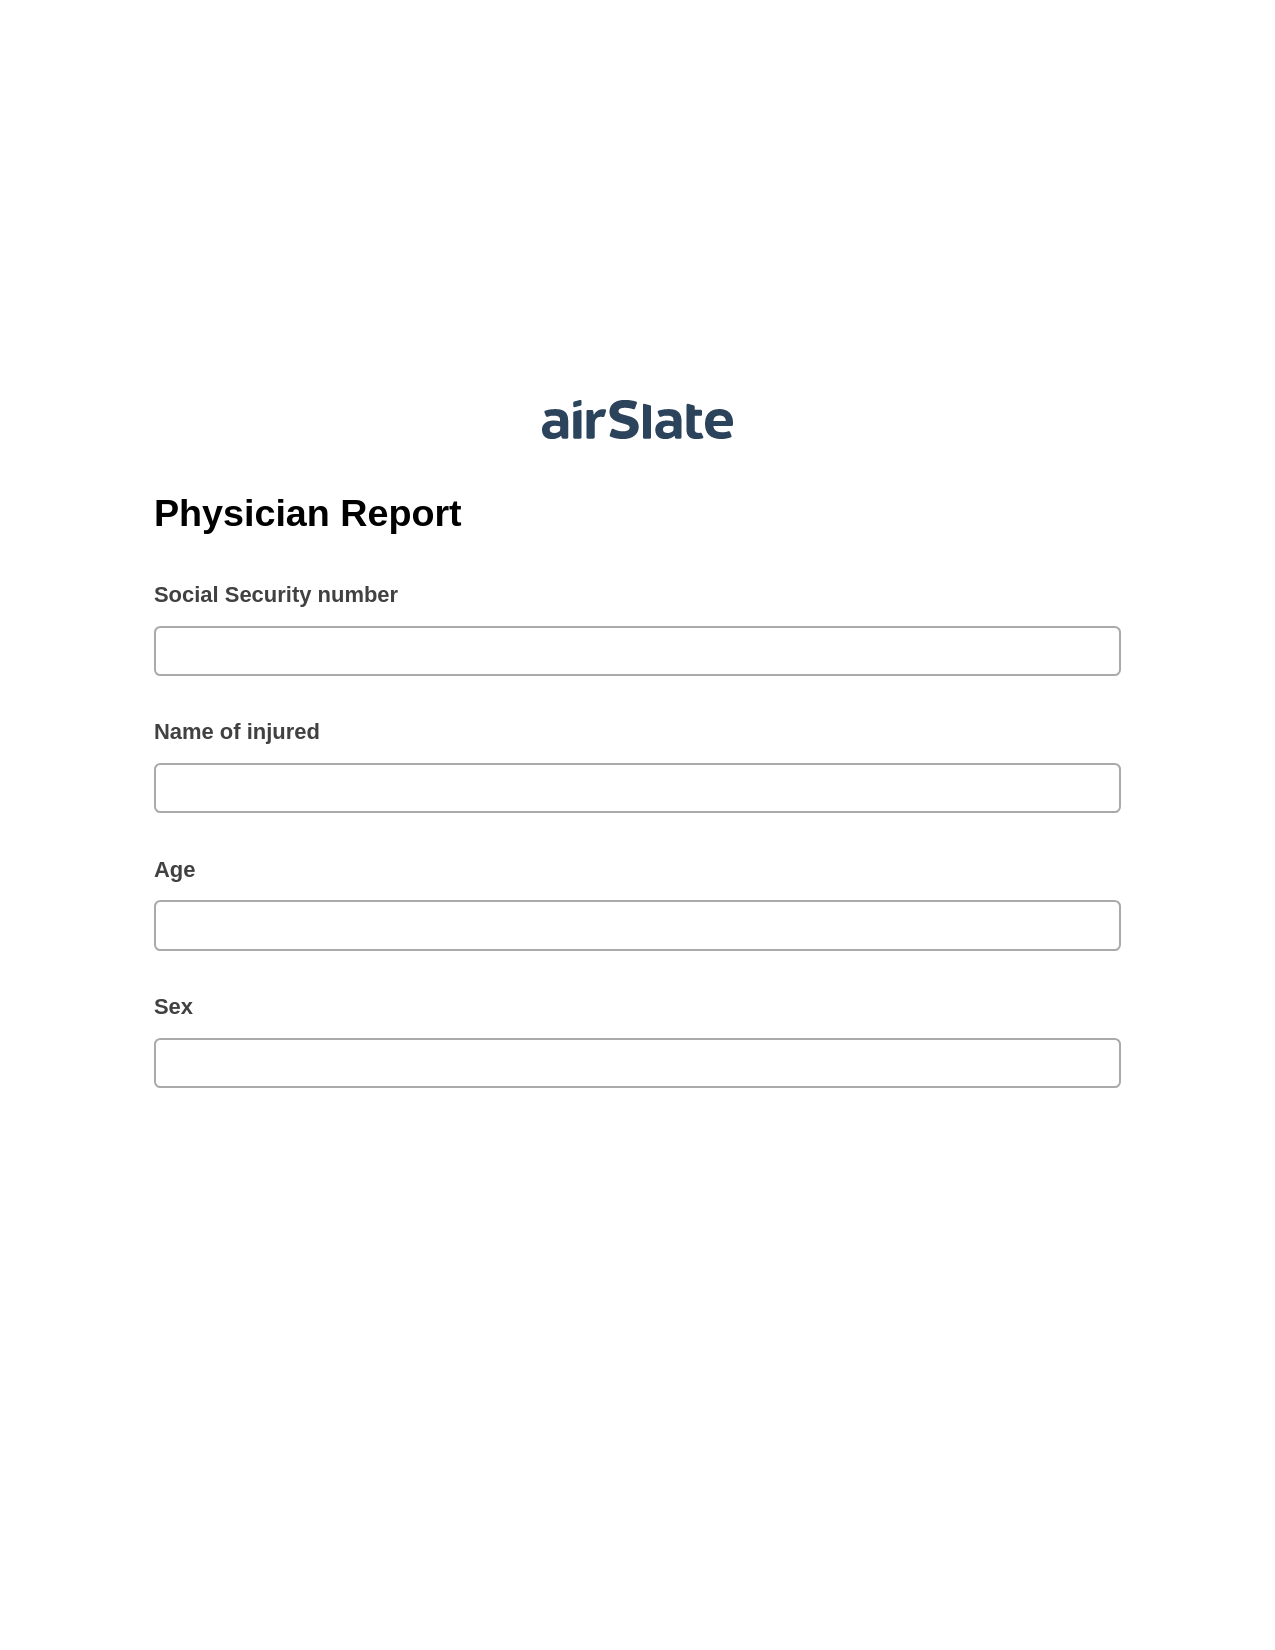 Physician Report Pre-fill from CSV File Bot, System Bot - Create a Slate in another Flow, Export to WebMerge Bot